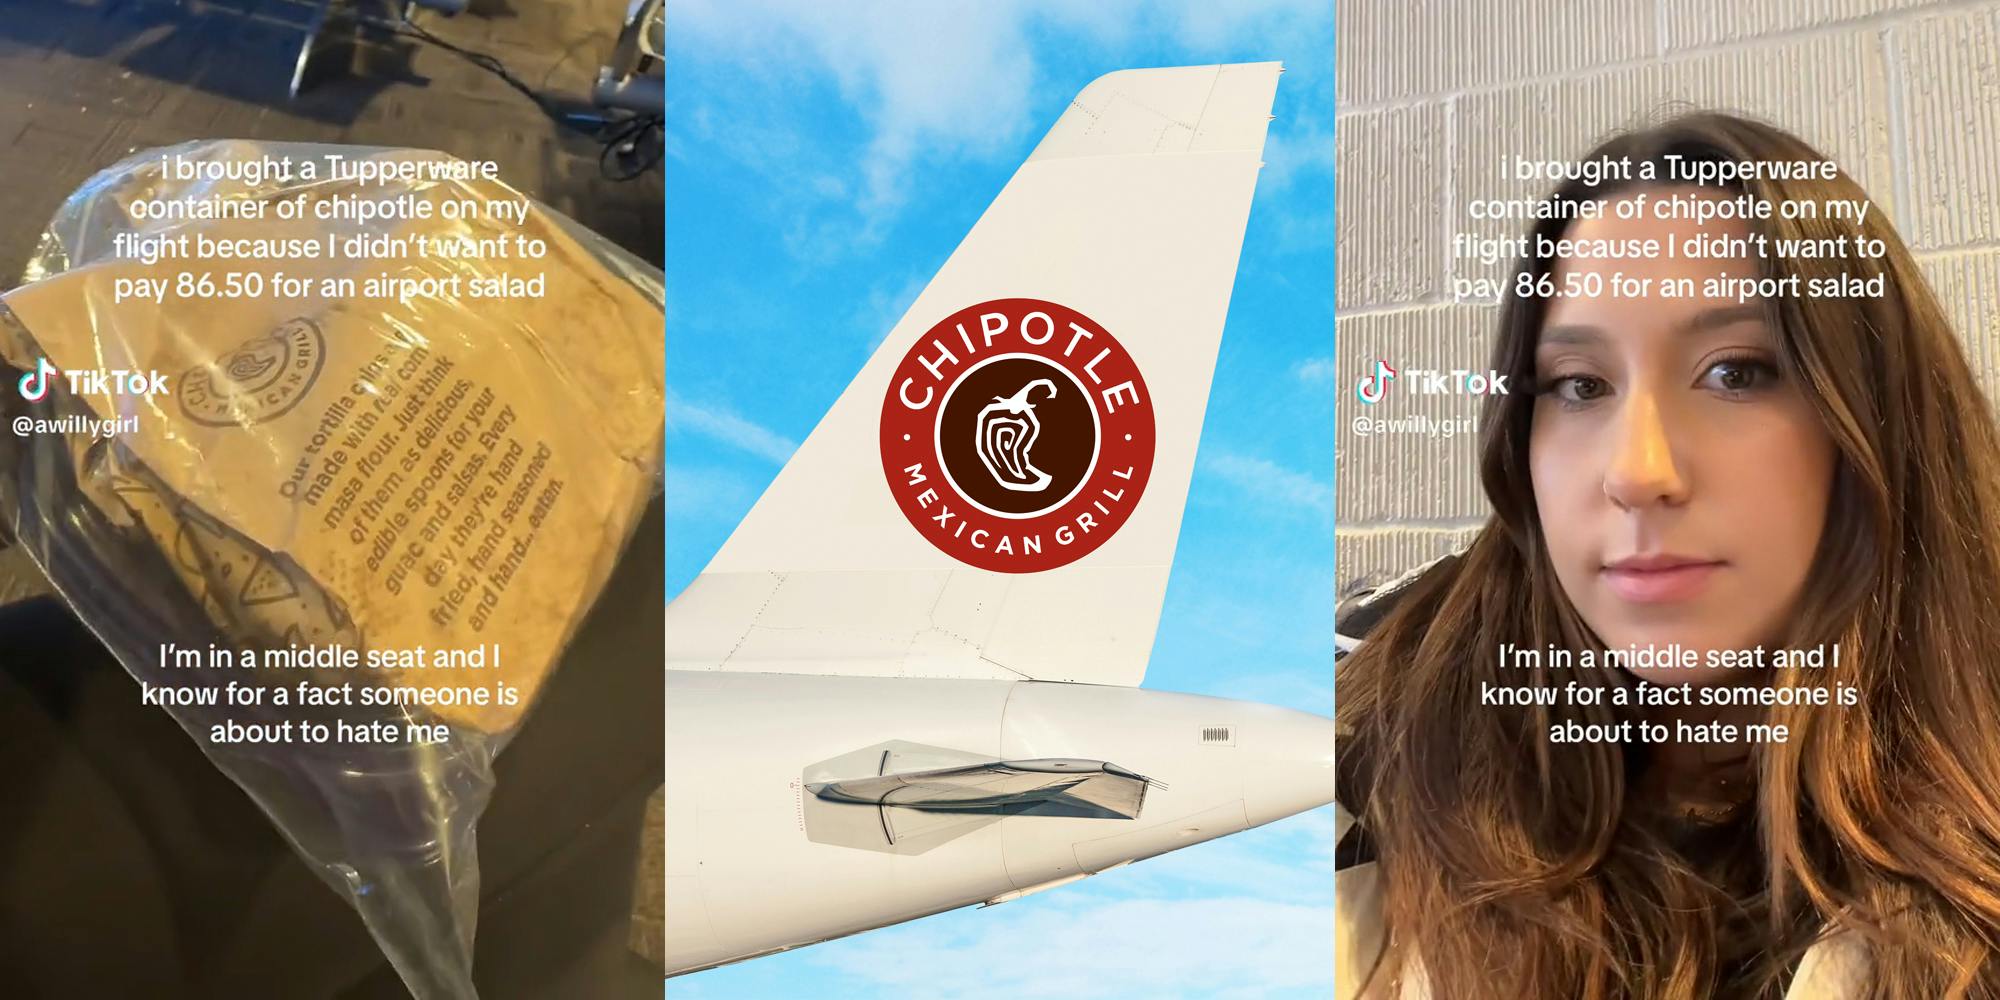 woman getting on plane with bag caption "I brought a Tupperware container of Chipotle on my flight because I didn't want to pay 86.50 for an airport salad" (l&r) airplane fin with Chipotle logo (c)